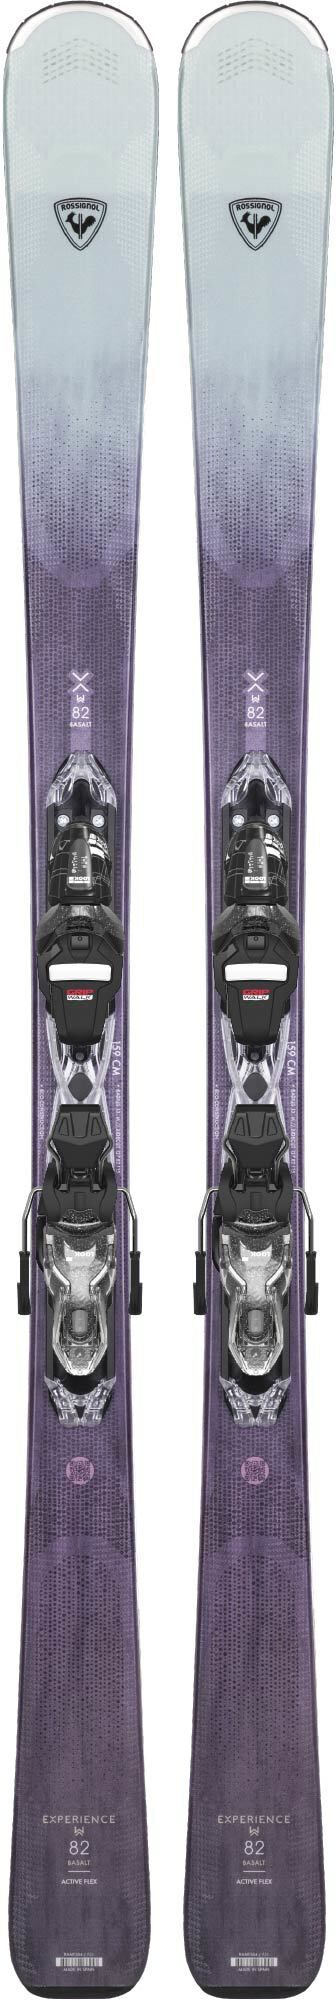 EXPERIENCE W 82 BASALT XPRESS | ALL MOUNTAIN | Rossignol